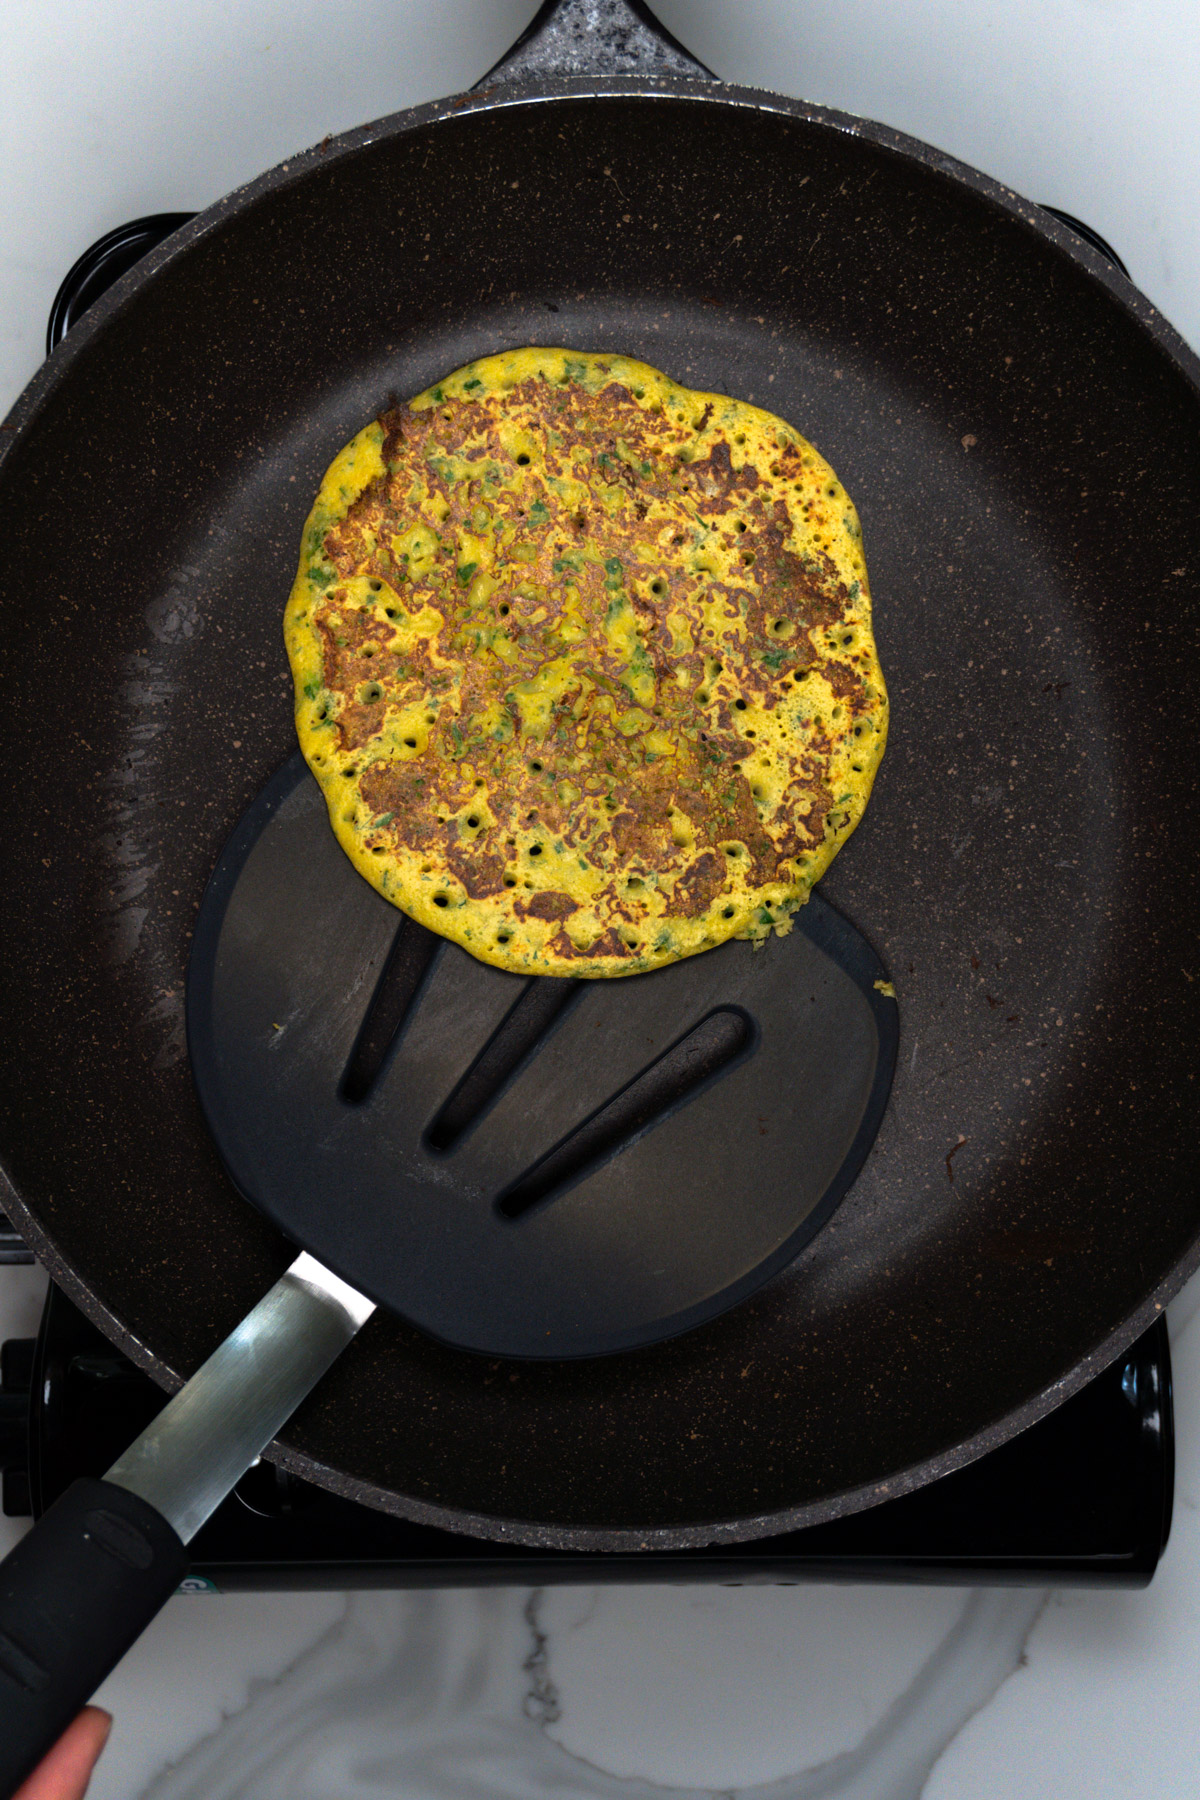 taking the omelette out of the fry pan with a spatula